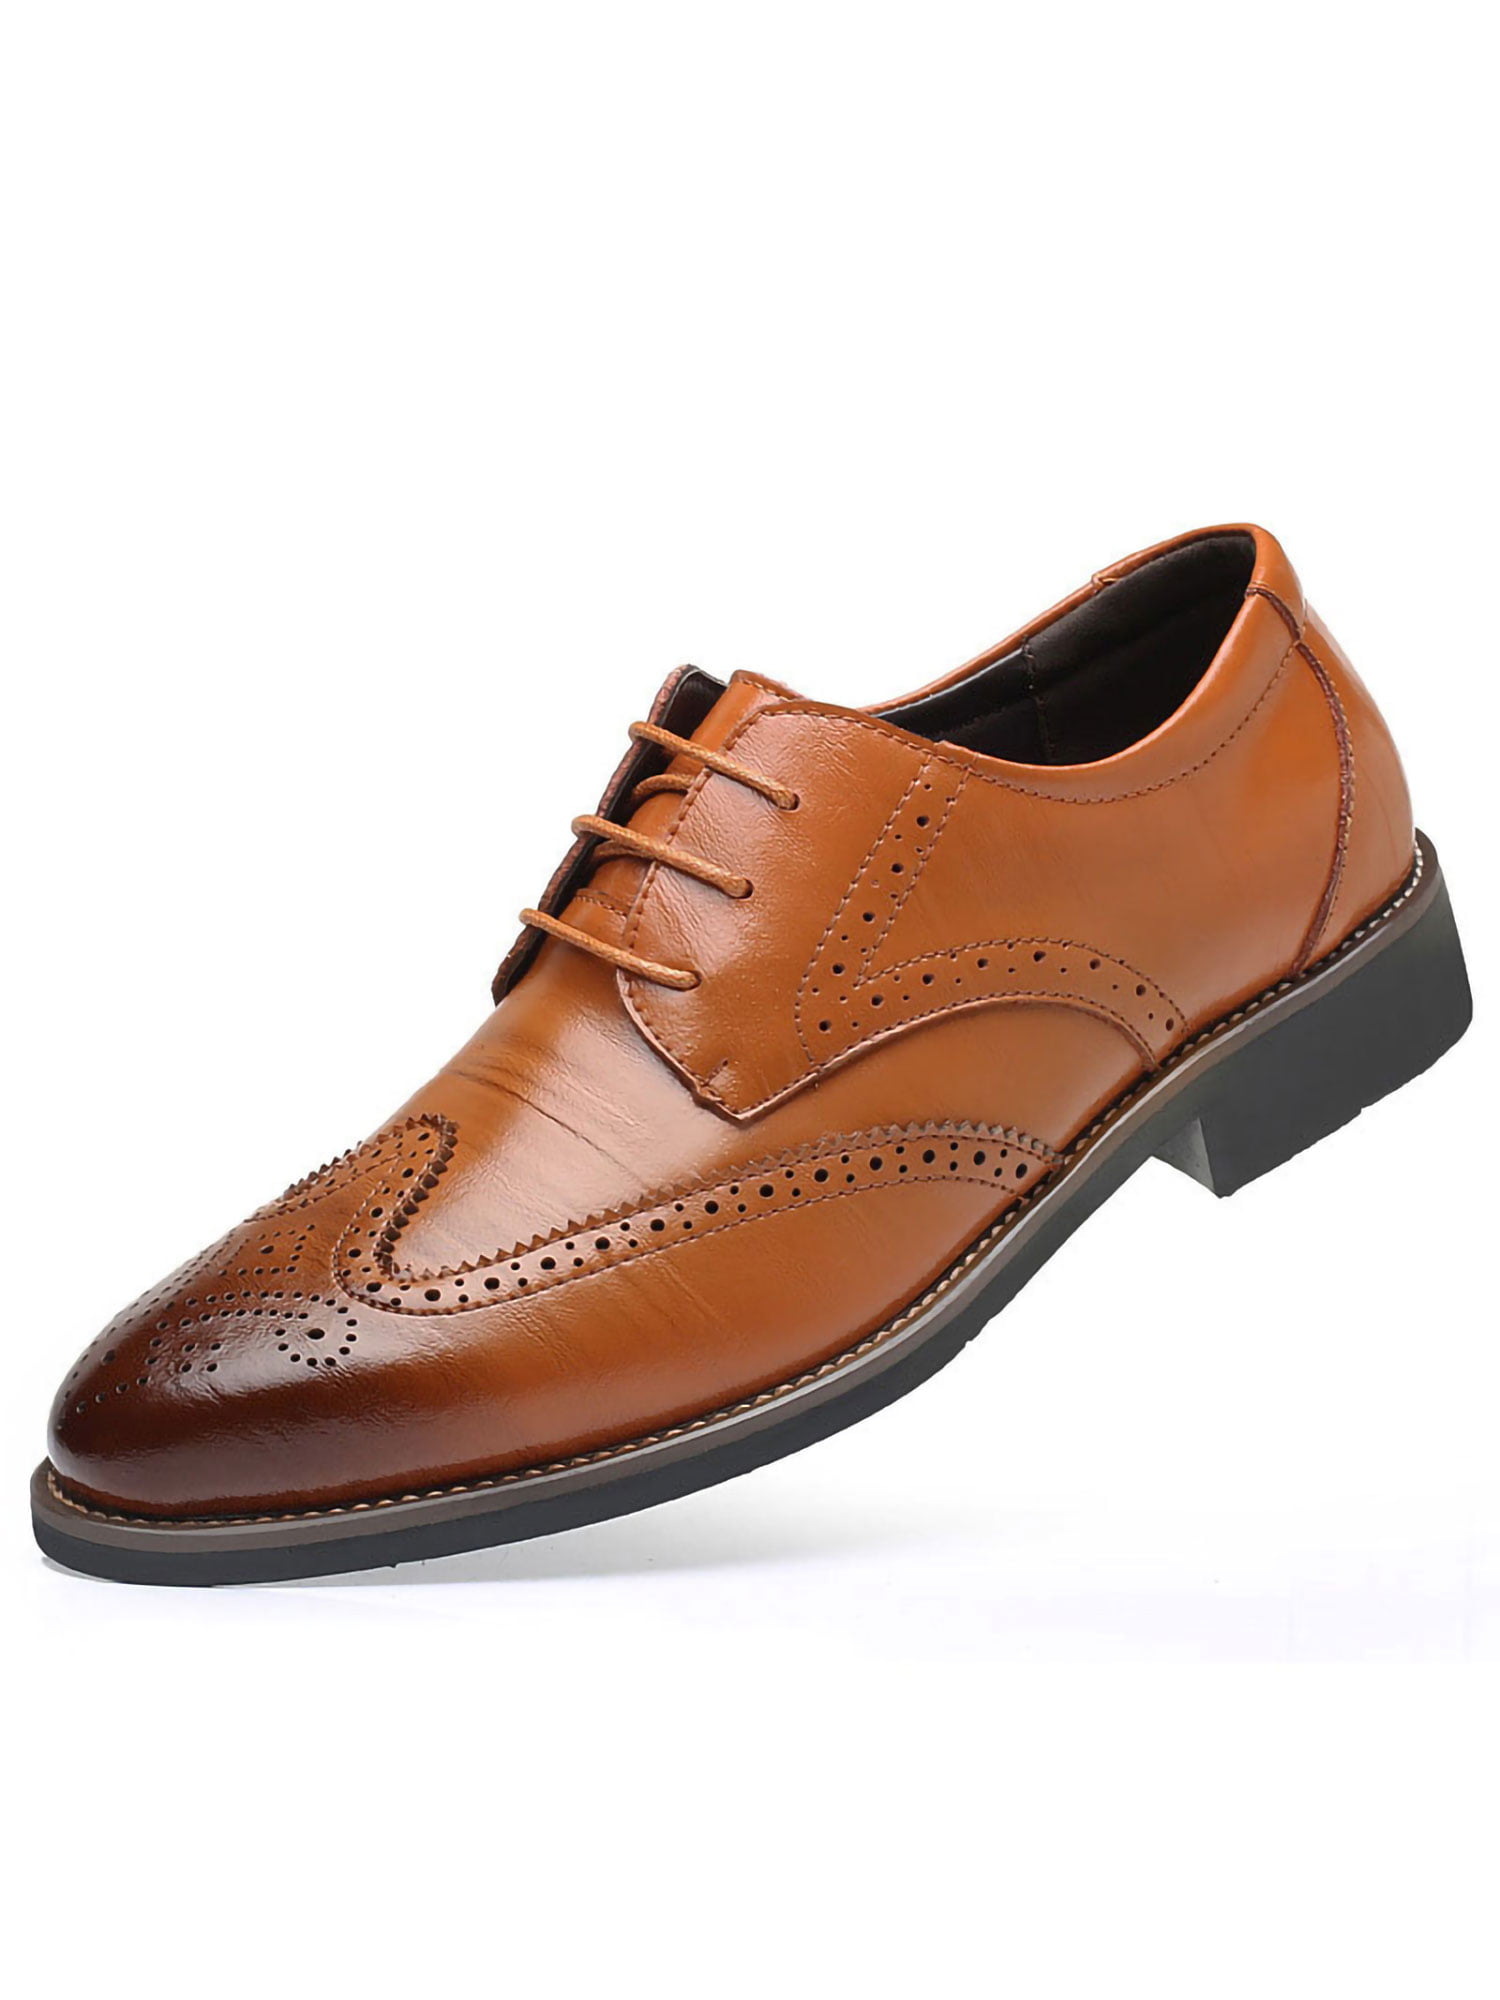 Details about   Oxfords Men's Leather Wedding Wing Tip Pointed Toe Dress Formal Brogue Shoes New